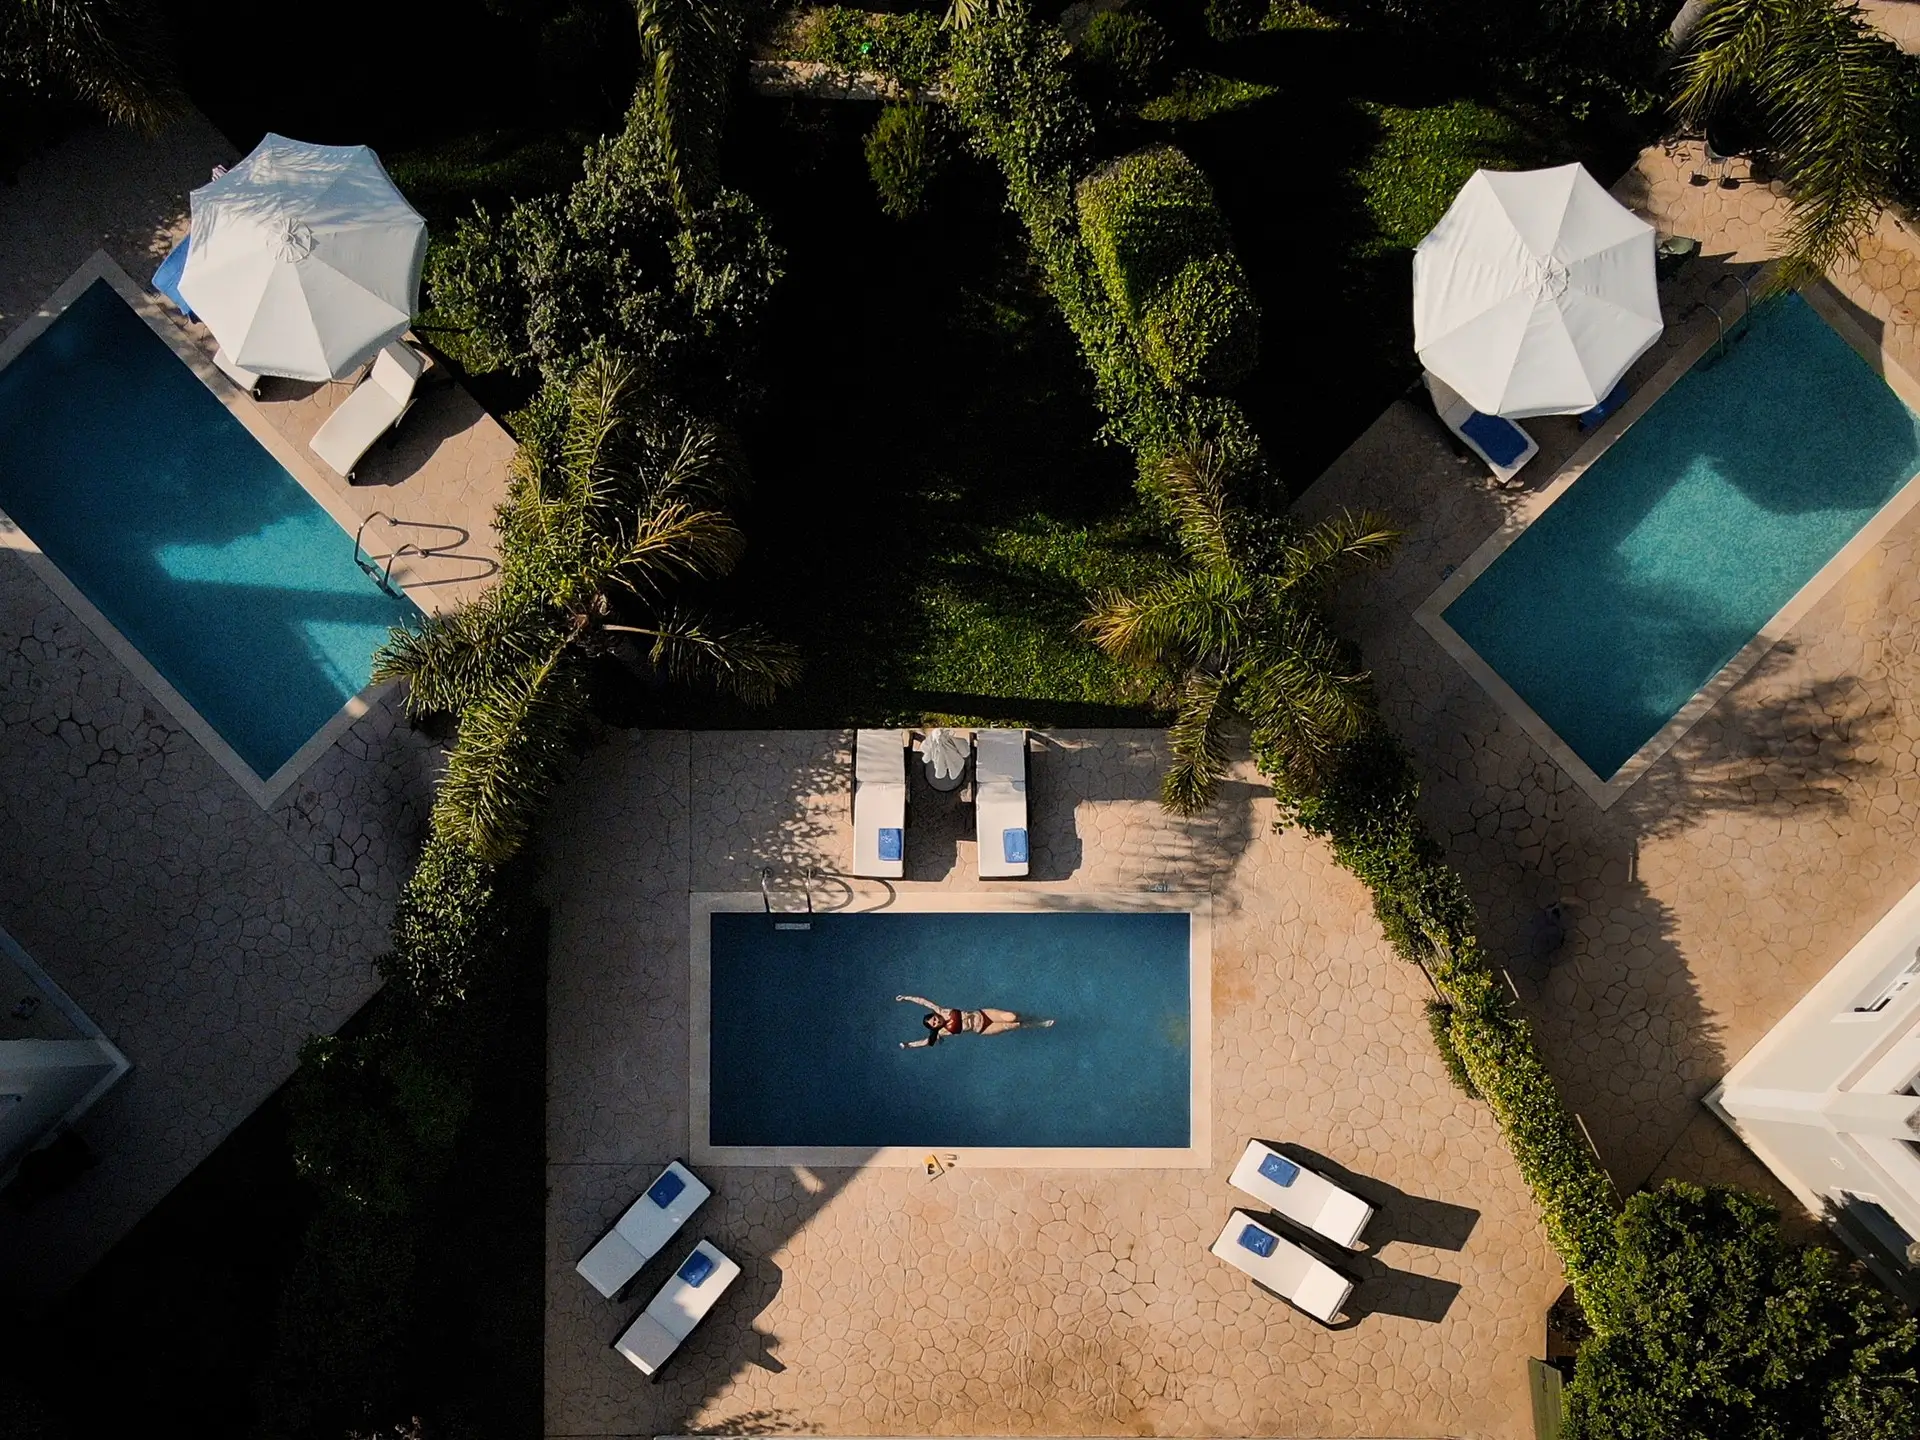 Mamfredas Luxury Resort Aerial Photo of the Pool, where a girl lies on the water in the middle.